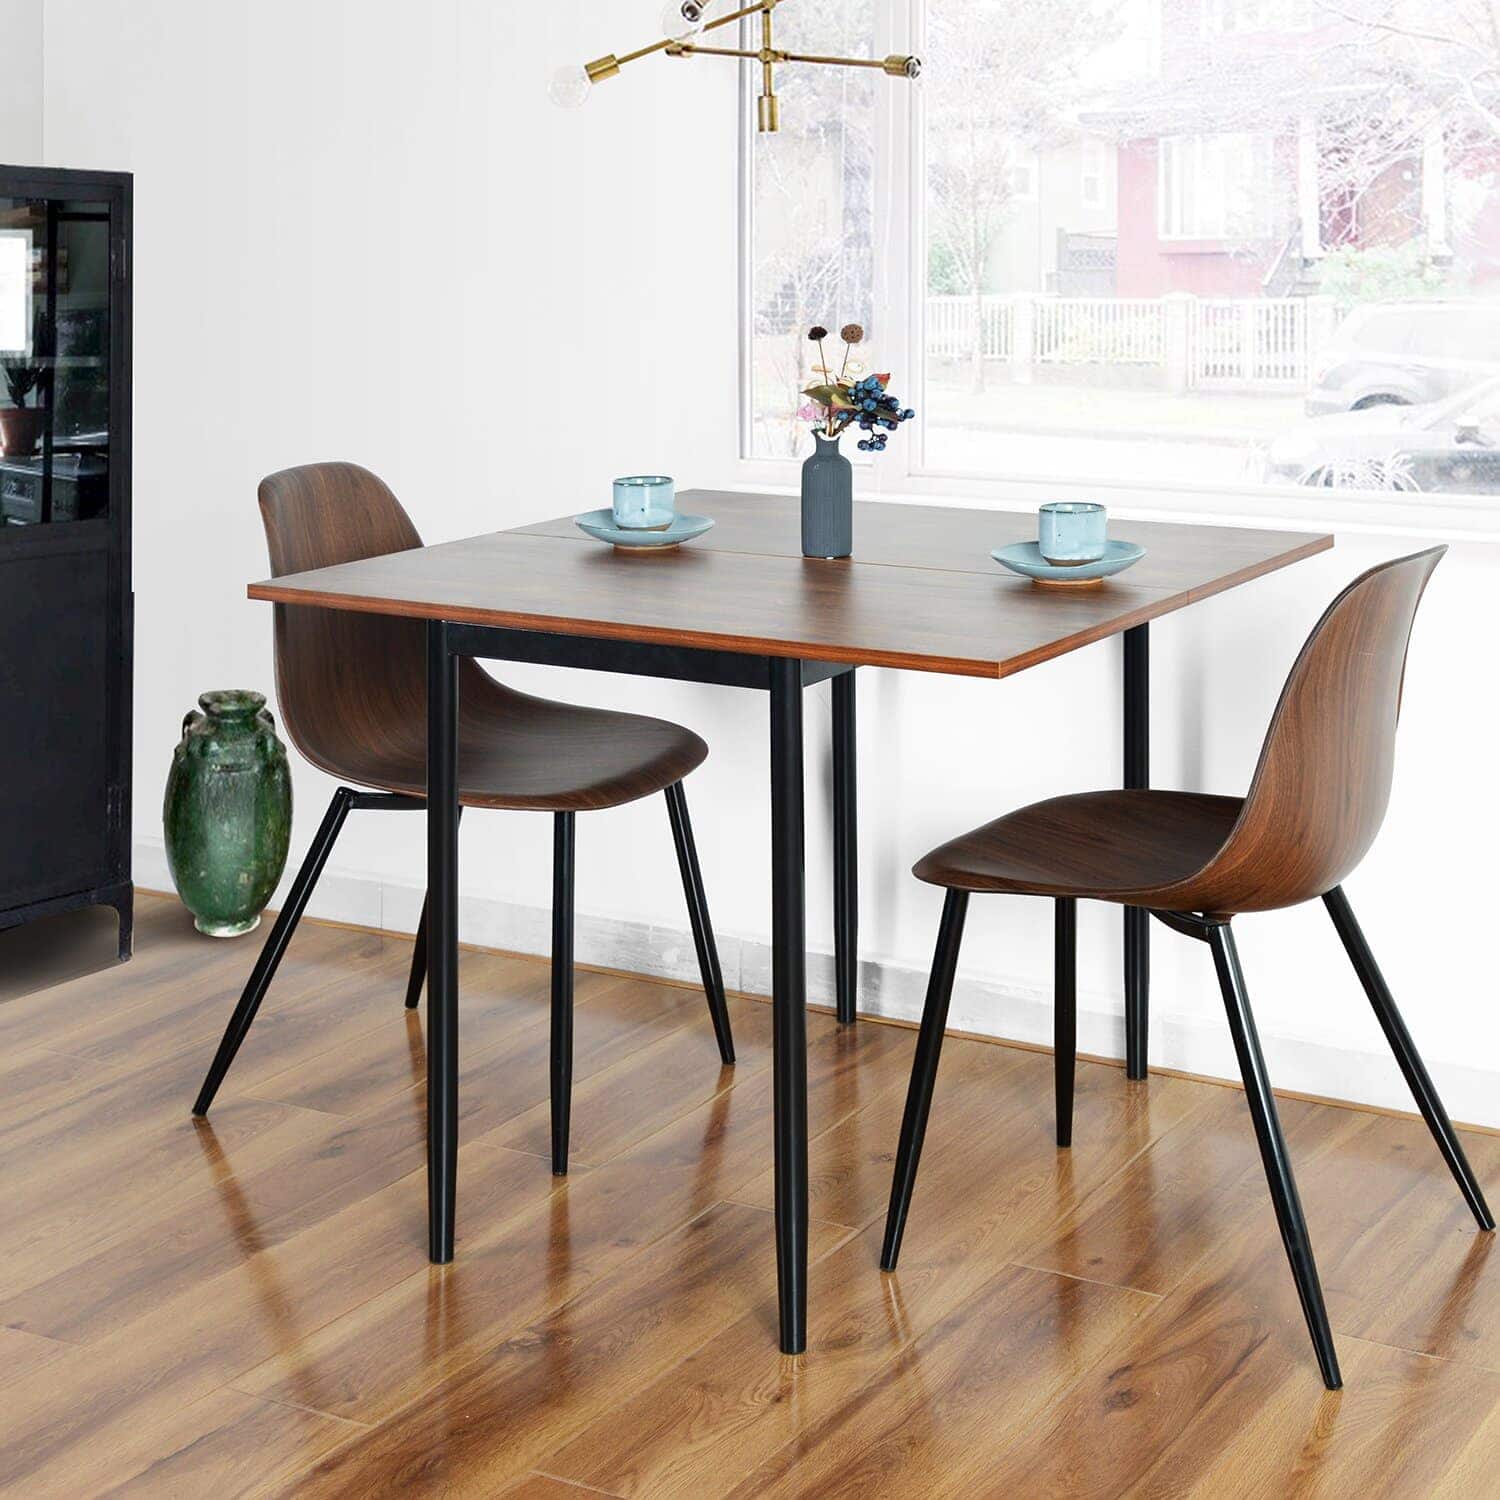 20 Dining Tables Ideas For Small Spaces, Folding Dining Table And Chairs For Small Spaces